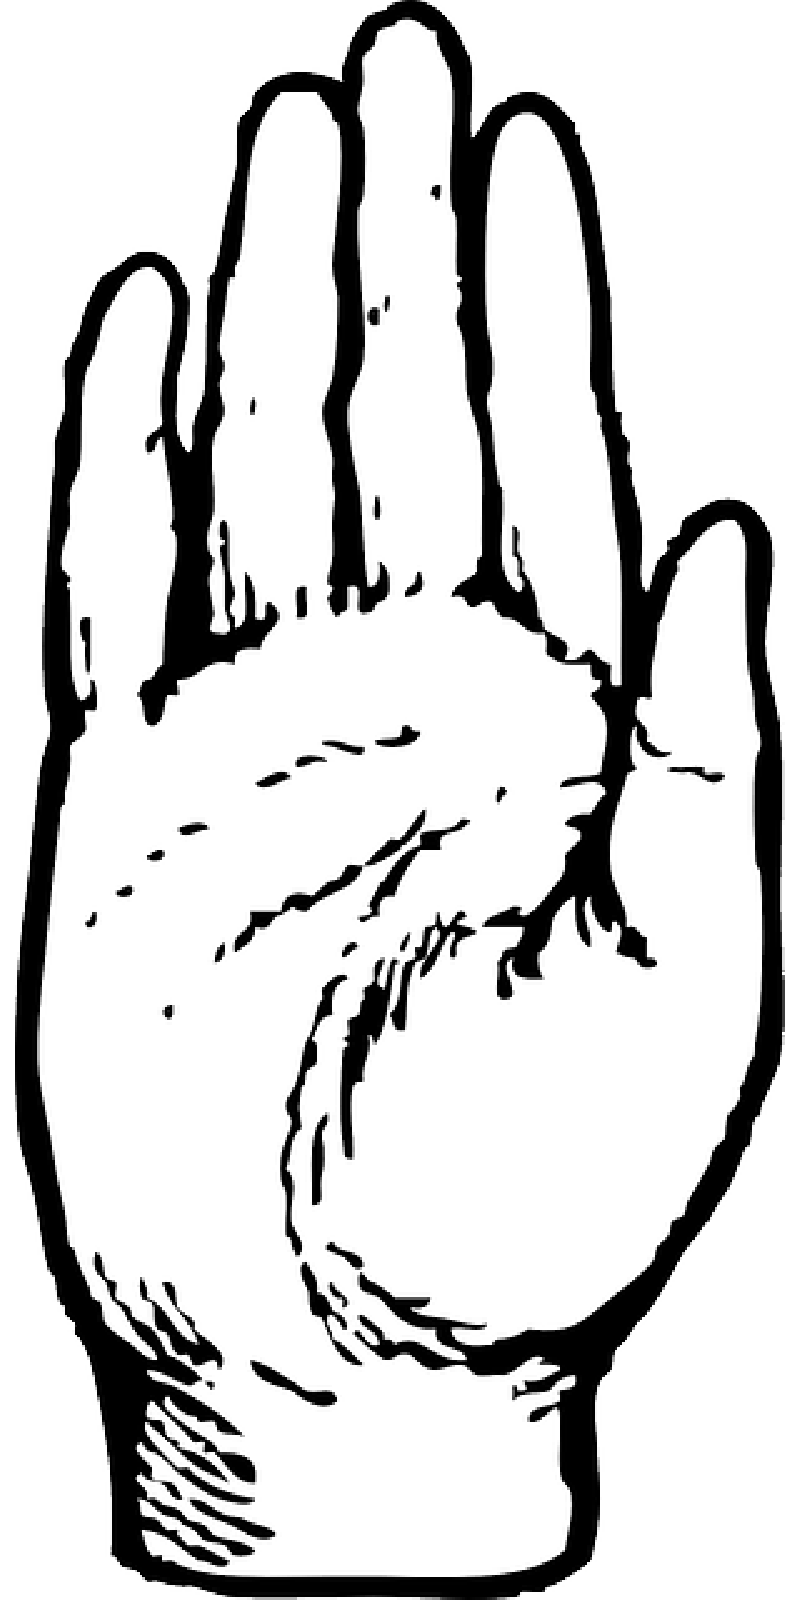 Clipart hand open. Hands drawing at getdrawings